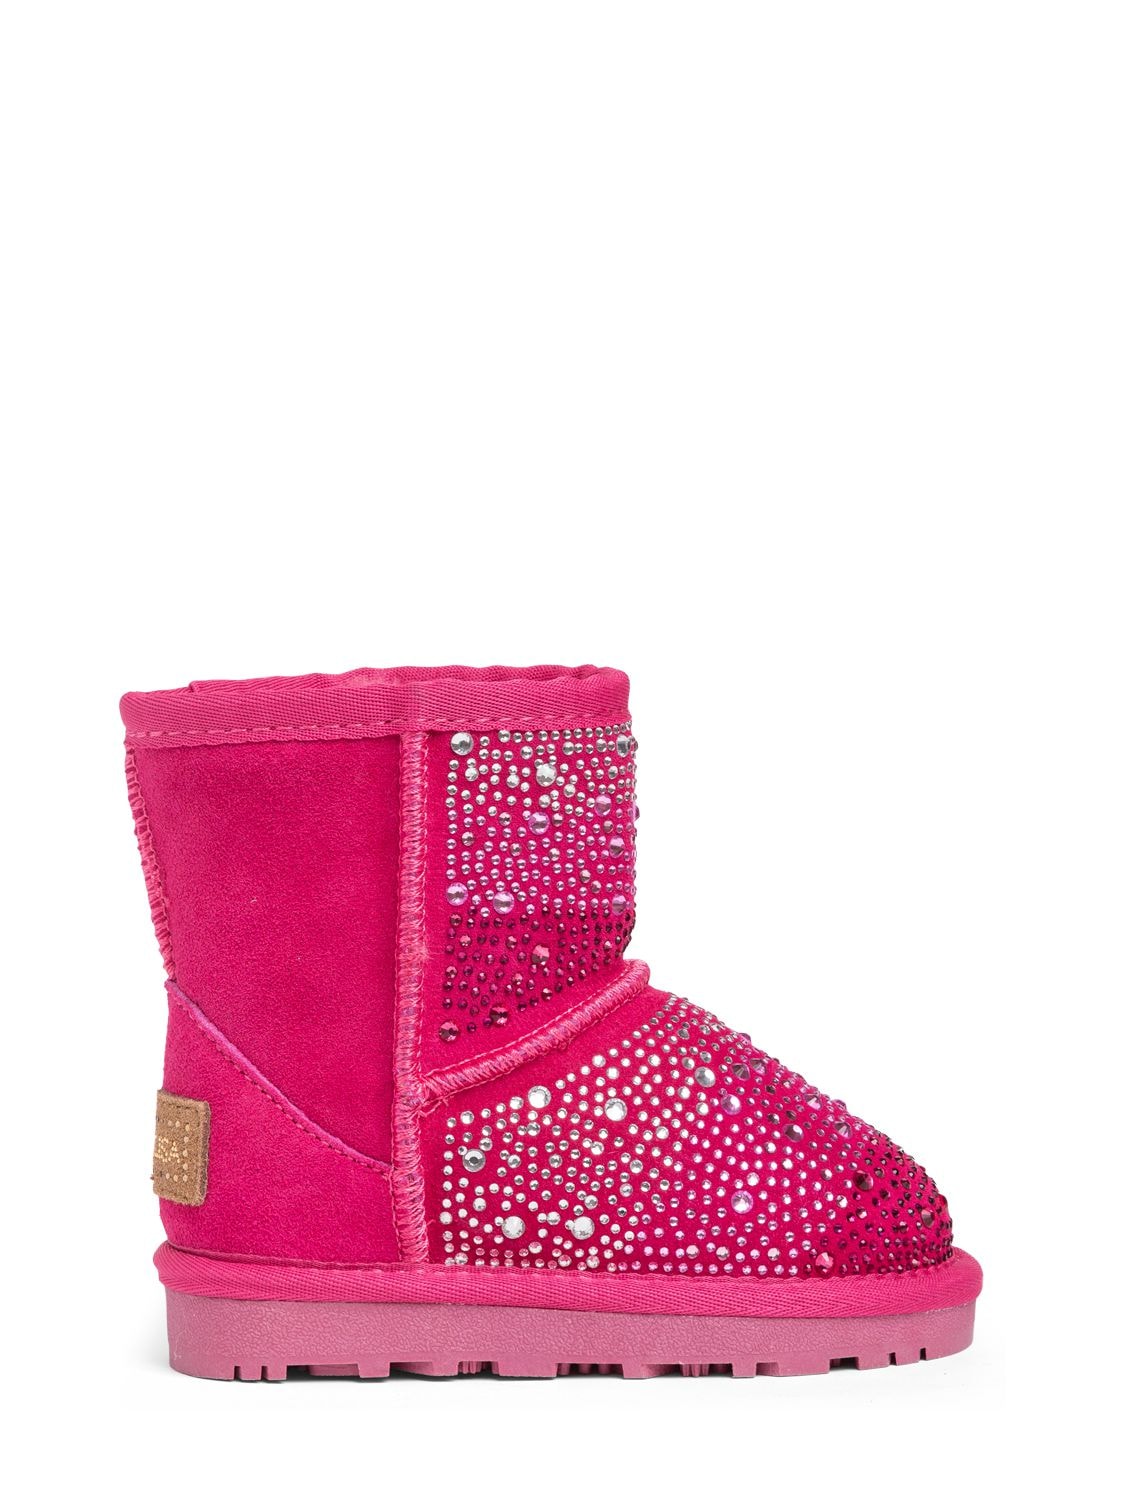 Embellished Boots W/ Faux Fur – KIDS-GIRLS > SHOES > BOOTS